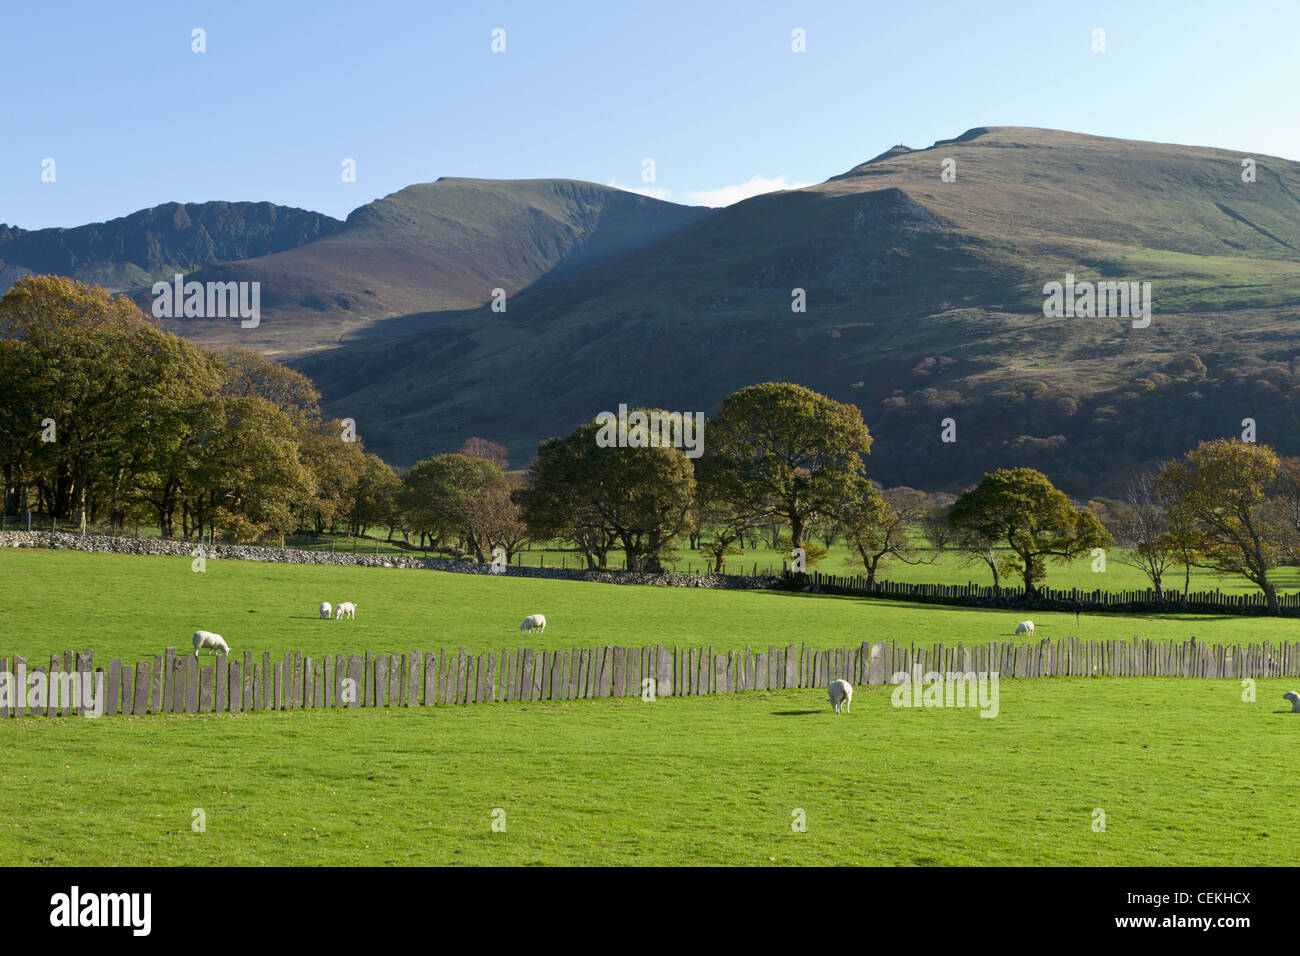 Sheep in a field, Snowdonia, Wales Stock Photo